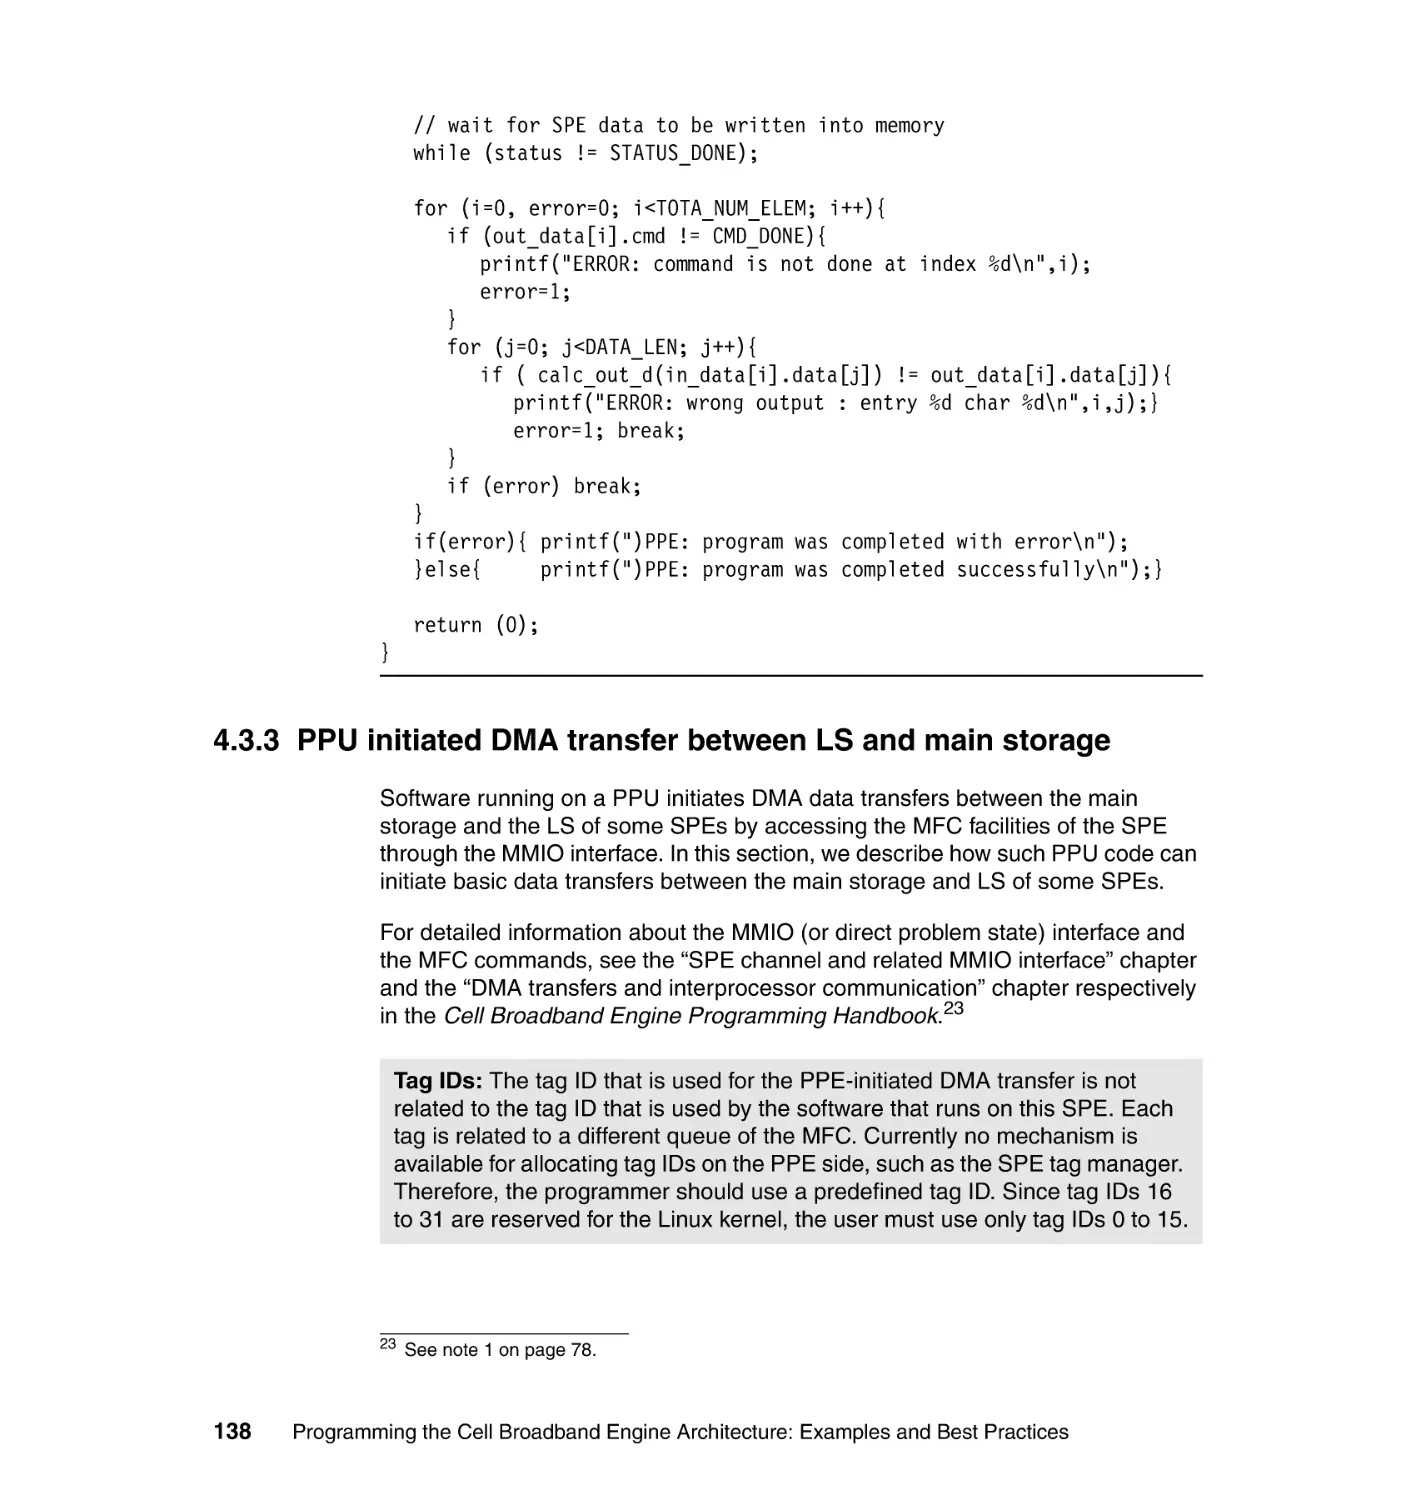 4.3.3 PPU initiated DMA transfer between LS and main storage